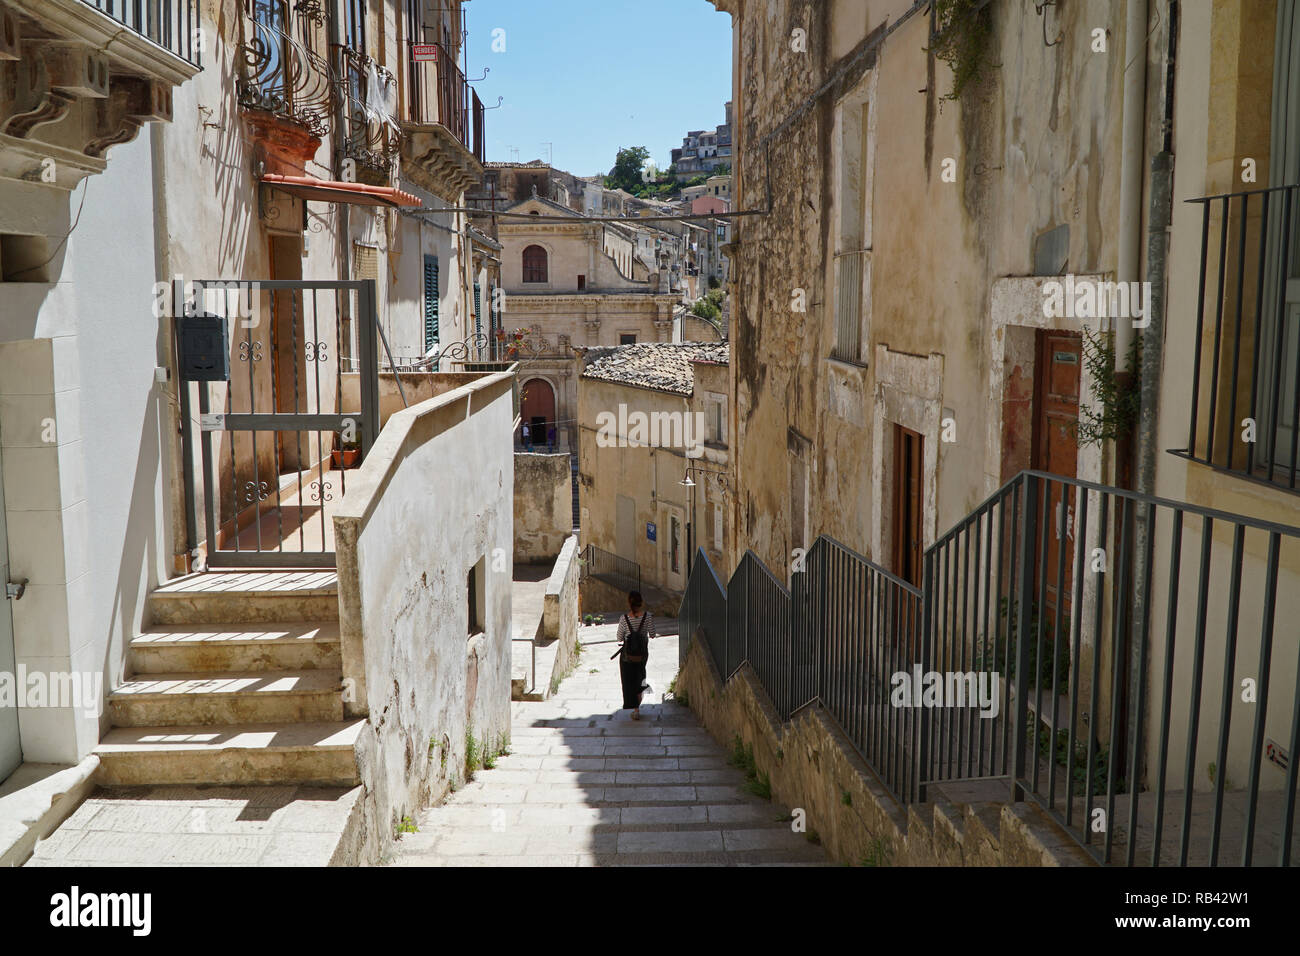 View of the narrow streets and steps of old Ragusa with a woman walking down a narrow street Stock Photo